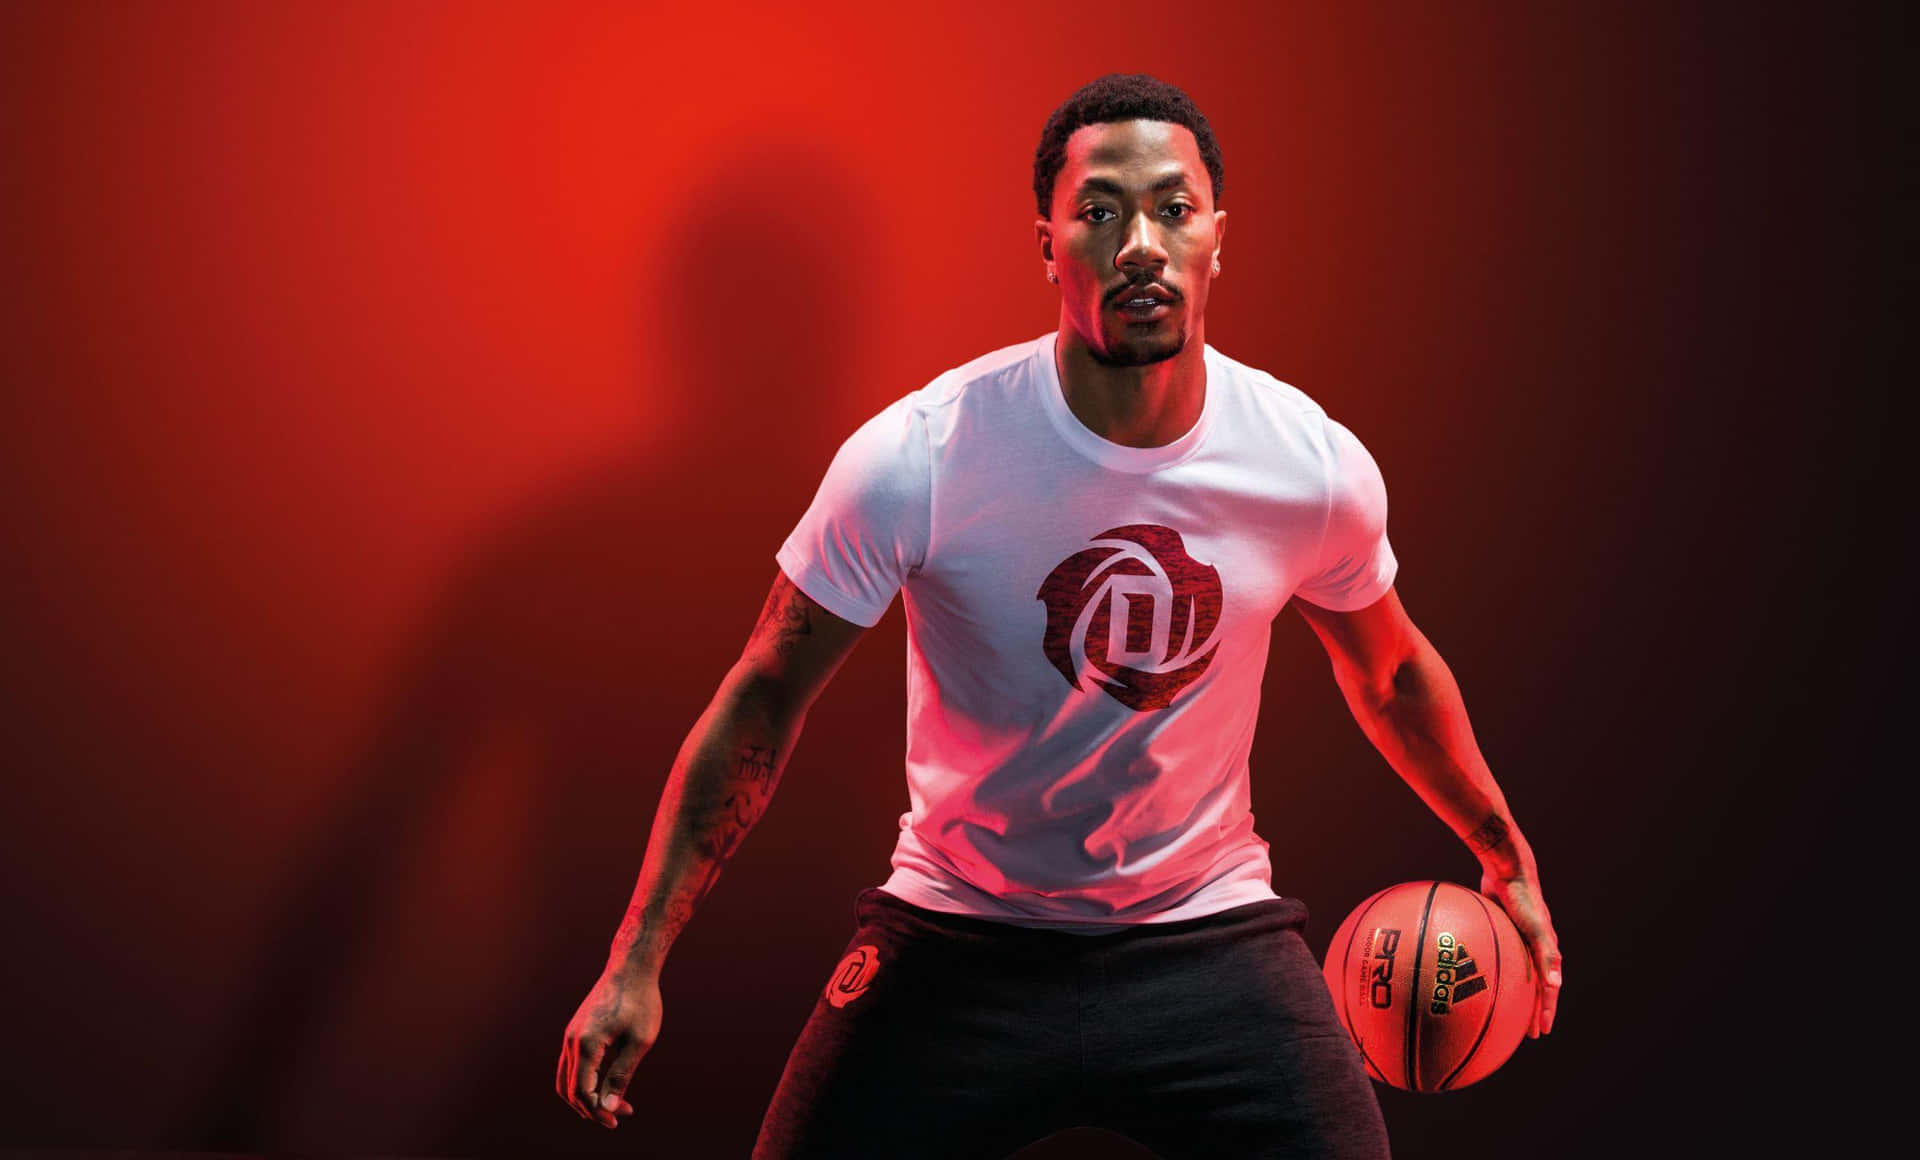 Derrick Rose taking on the competition Wallpaper